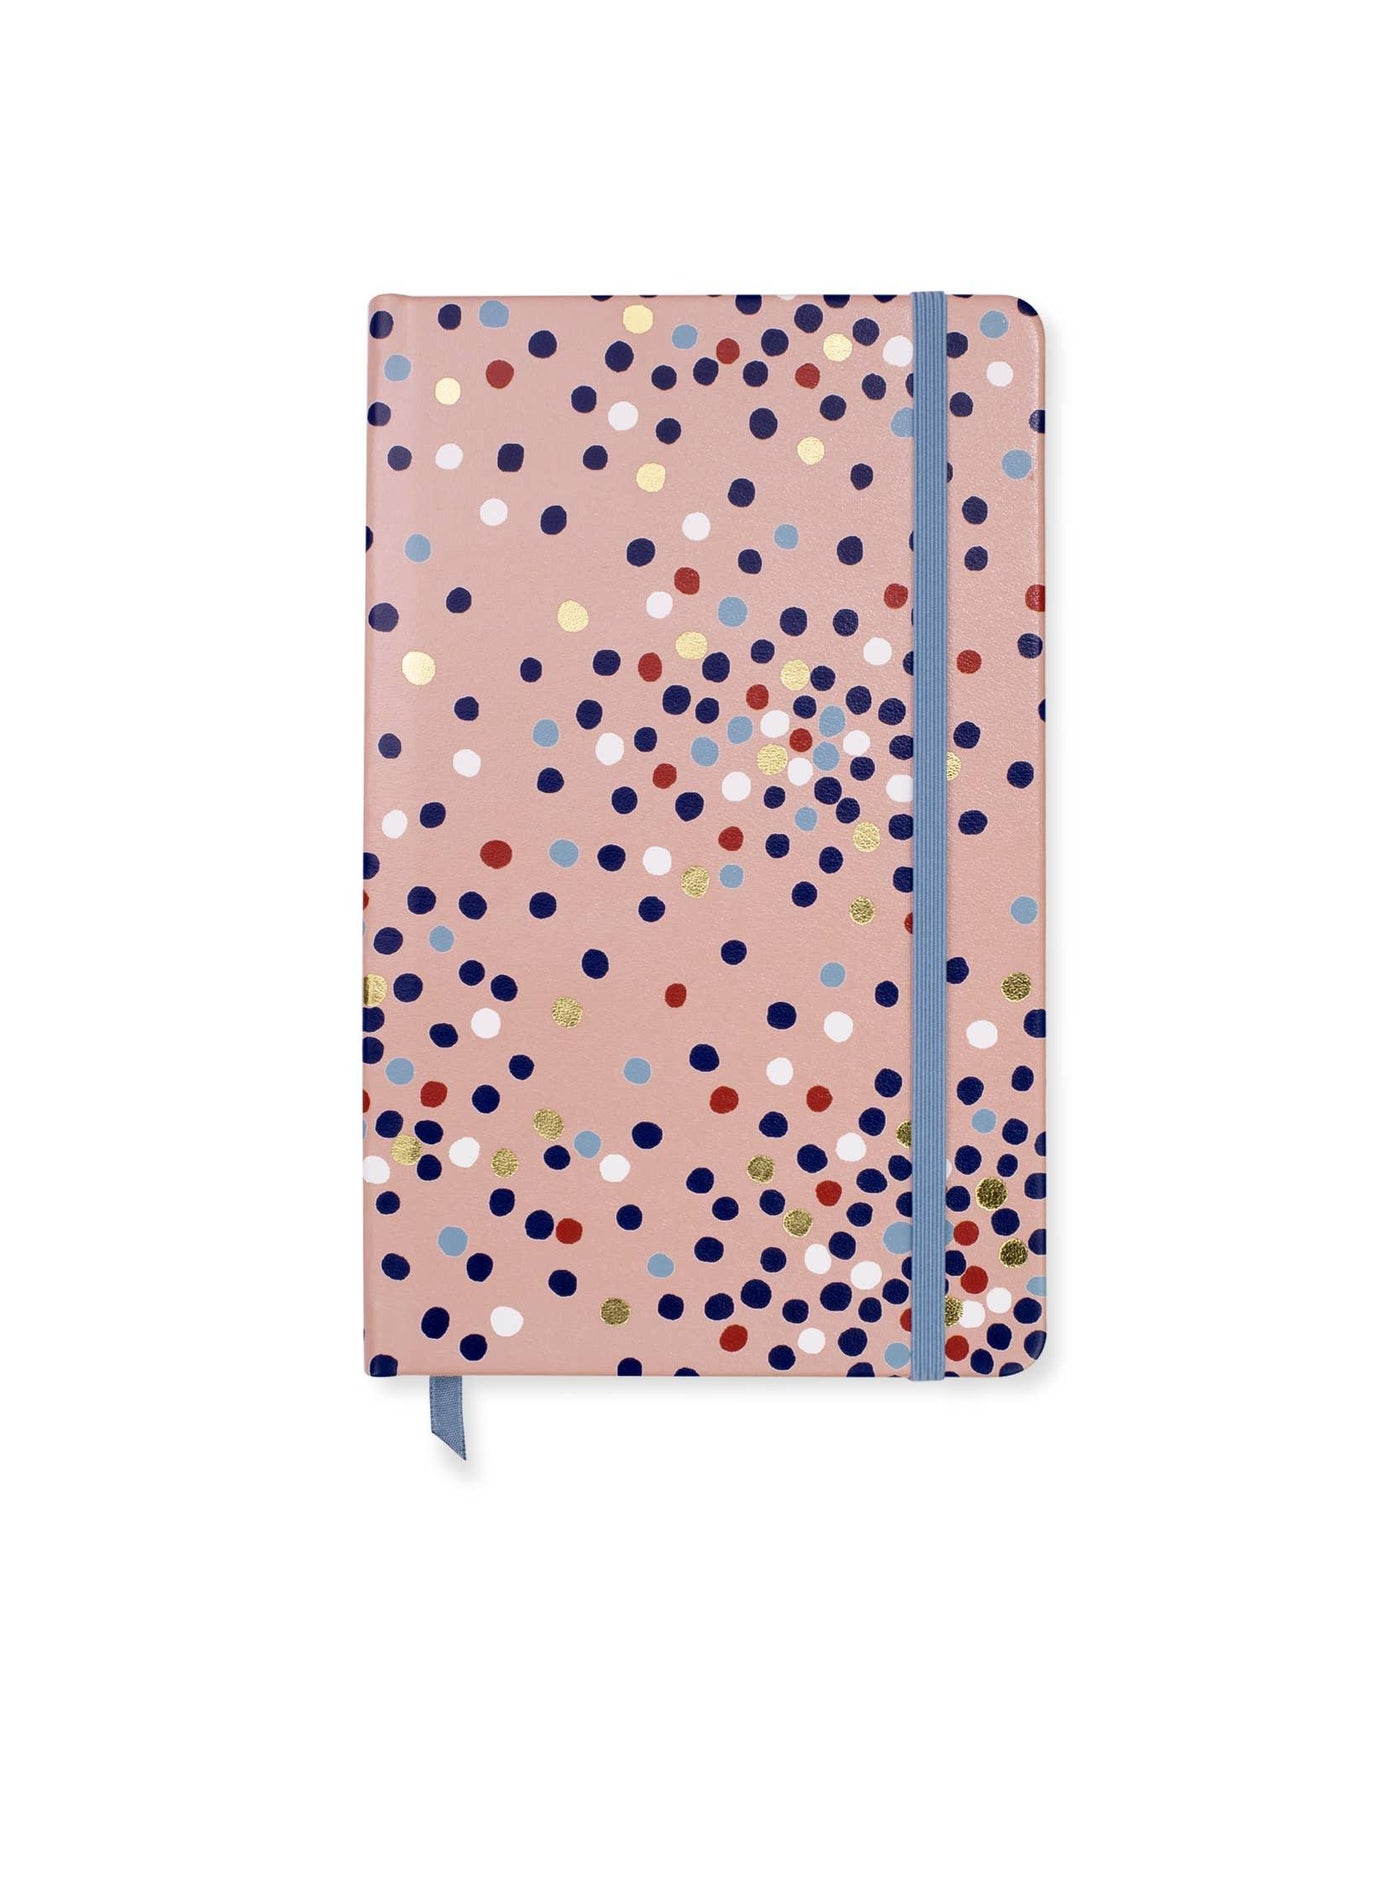 Notebook with a pink background and multicolored polka dots and elastic closure